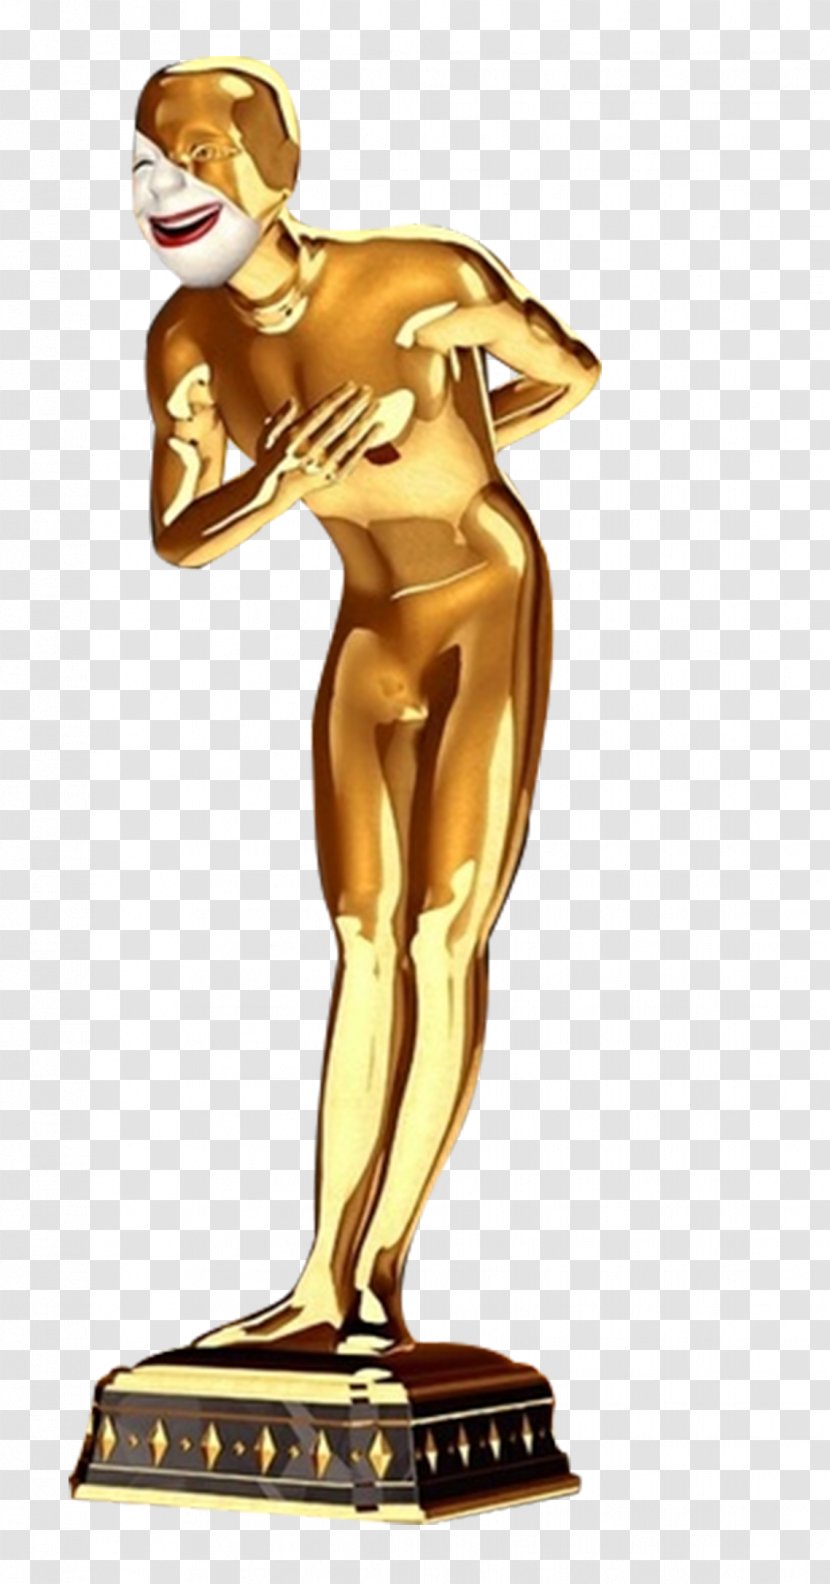 Comedian Television Show Rosette - Trophy - Harmony Gold Award Transparent PNG